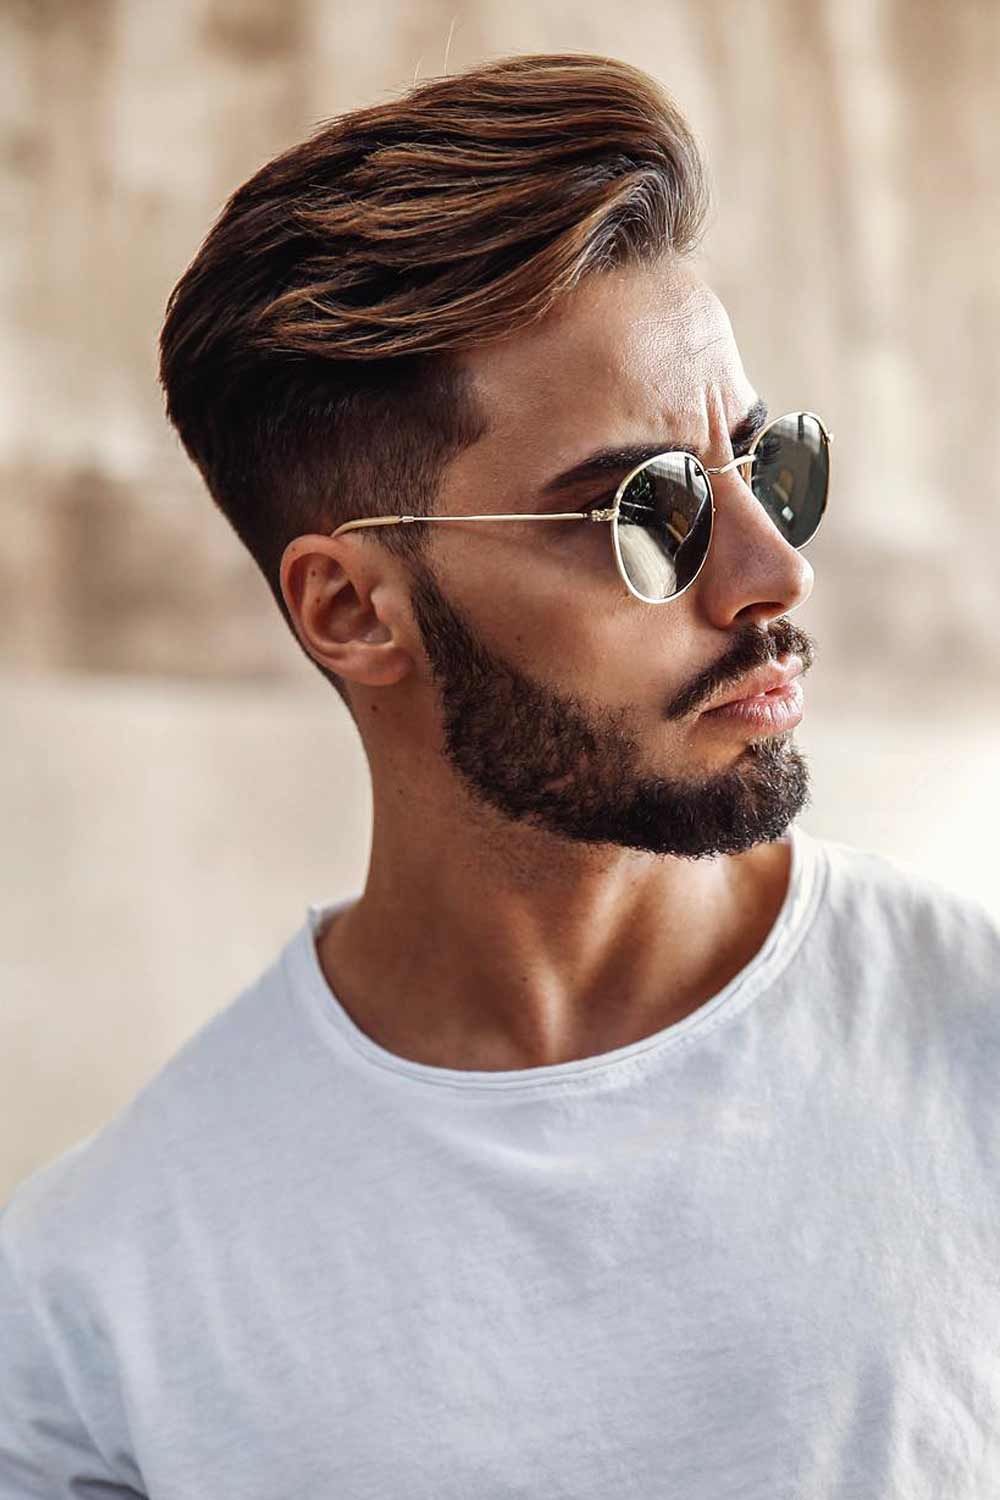 20 Best Undercut Hairstyles & Haircuts for Men